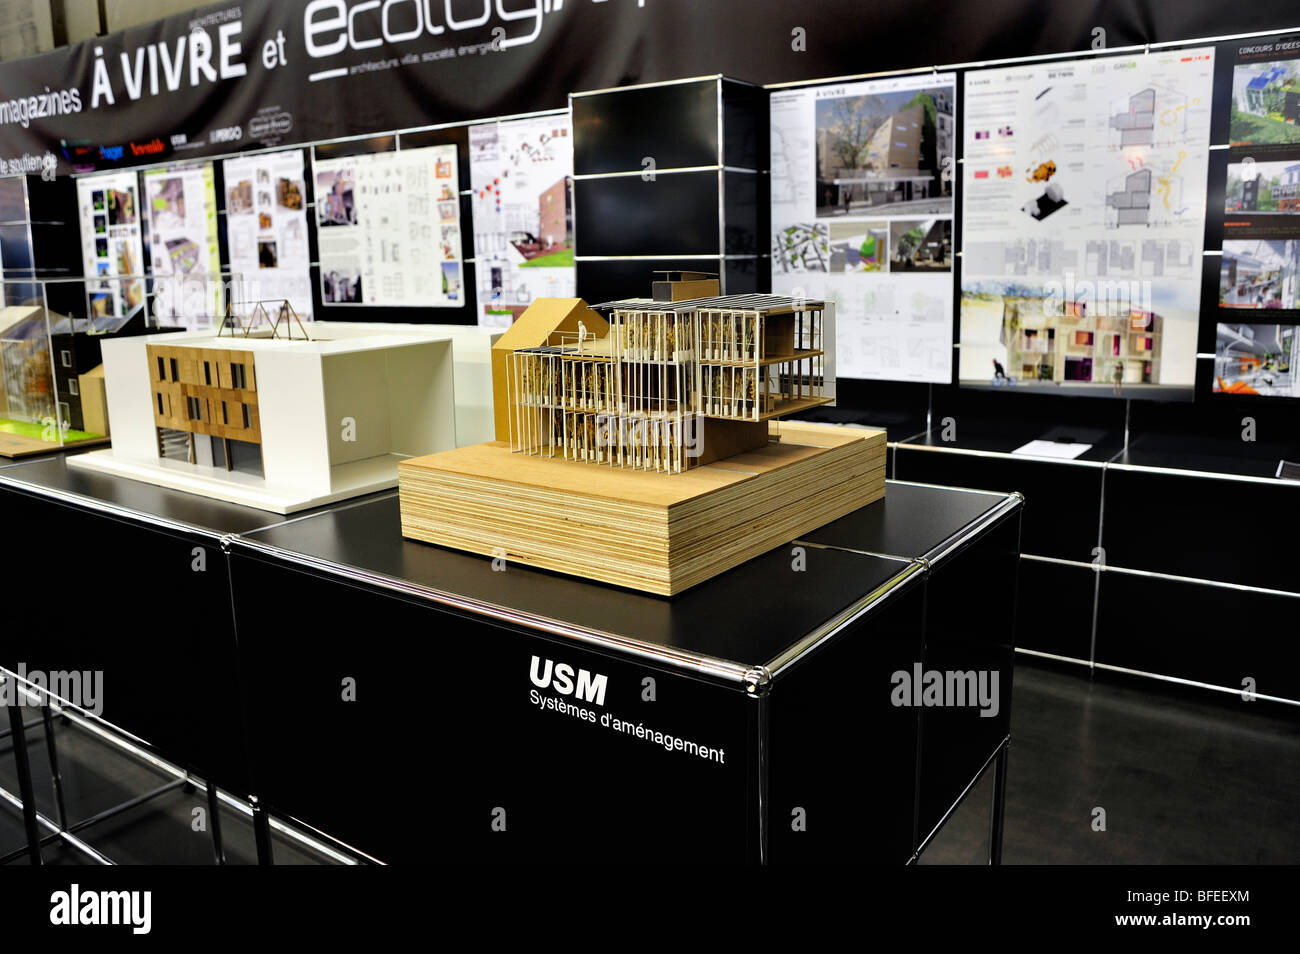 Paris, Frankreich, Construction Equipment 'Trade Show', 'Salon Batimat', Eco-House Architectural Model Projects on Display, Environmental Sustainable, Stockfoto